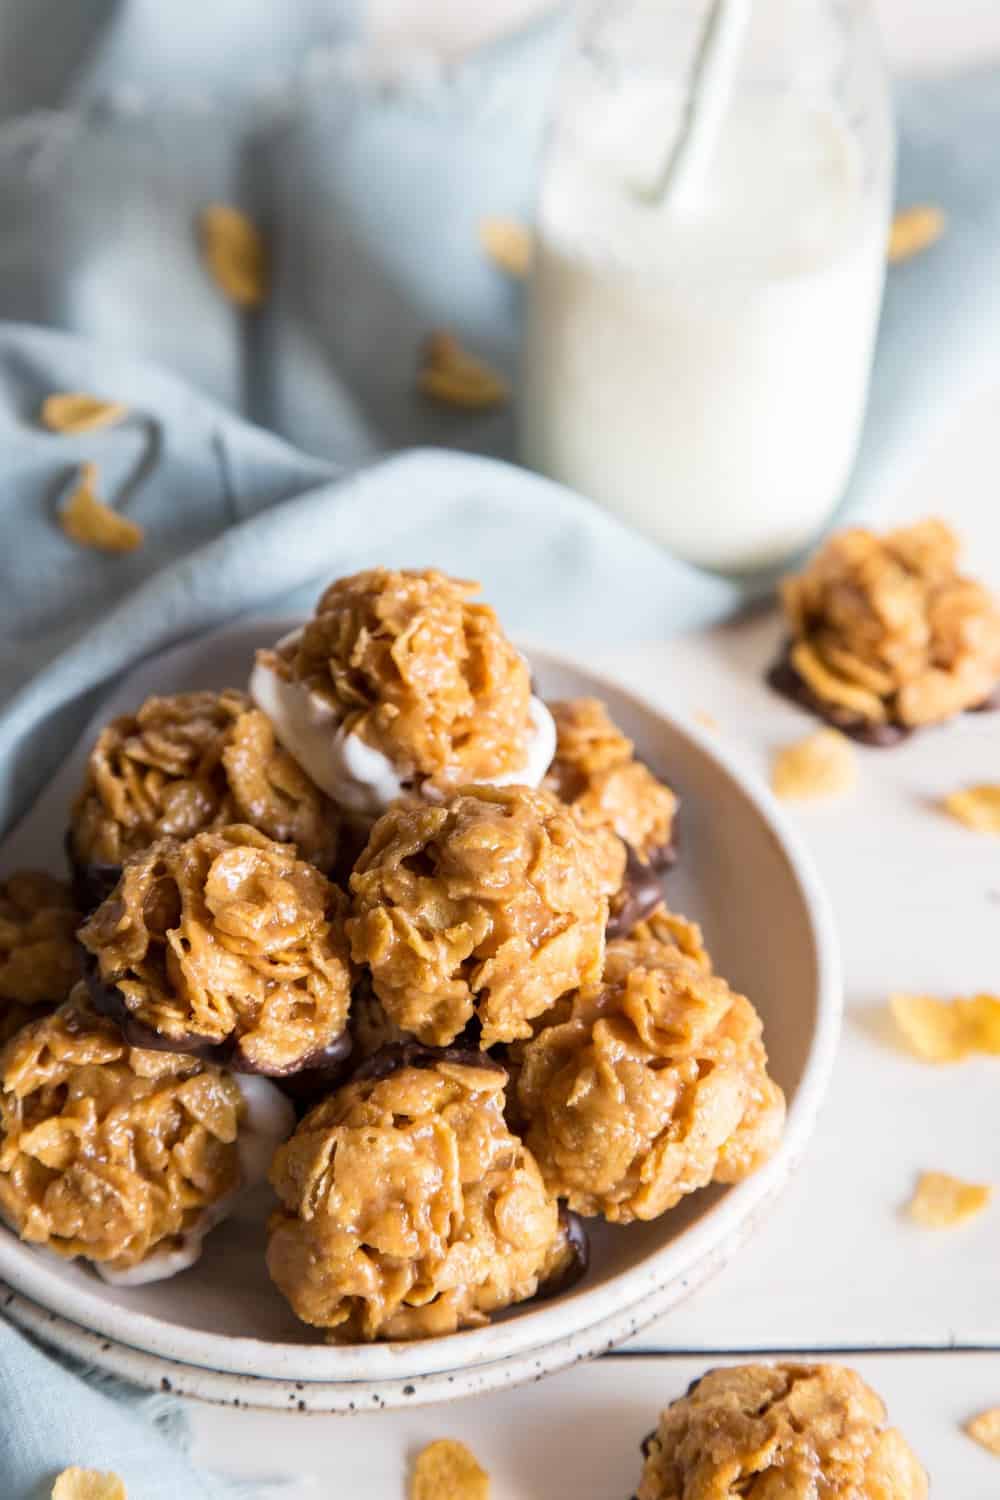 Peanut butter cornflake cookies on a plate